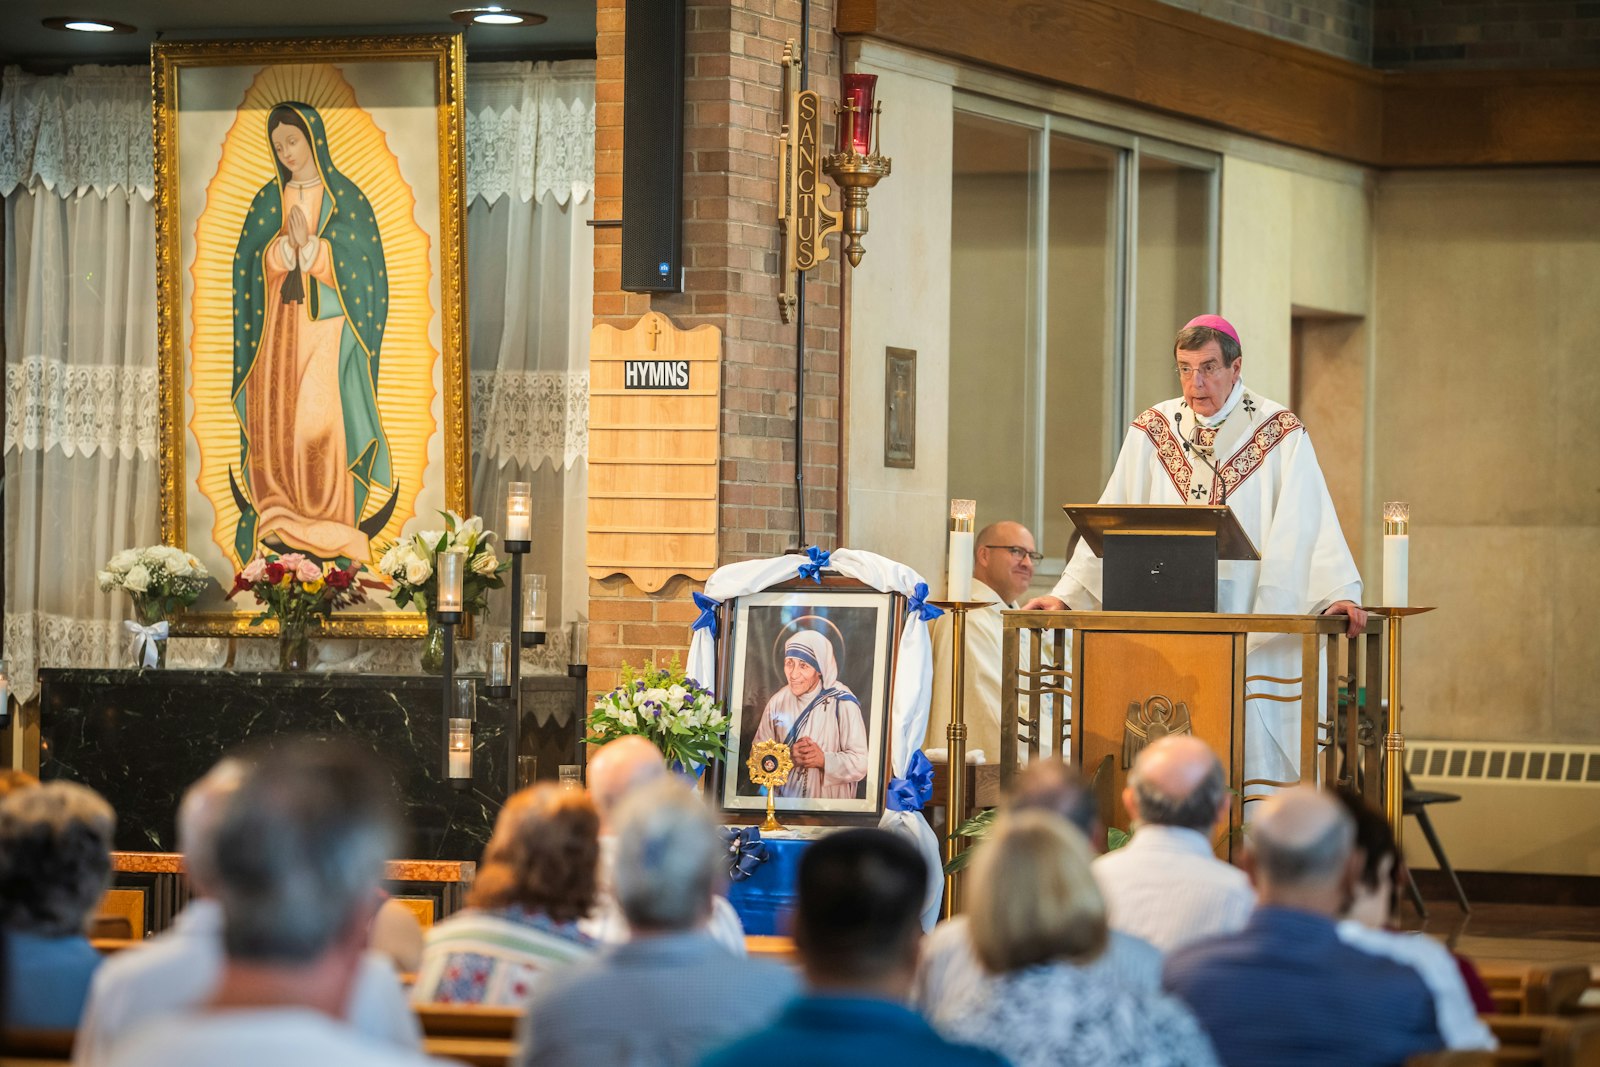 Archbishop Vigneron thanked the sisters for their continued presence in Detroit and their representation of the charisms of St. Teresa. The sisters have been present in the city since 1979.